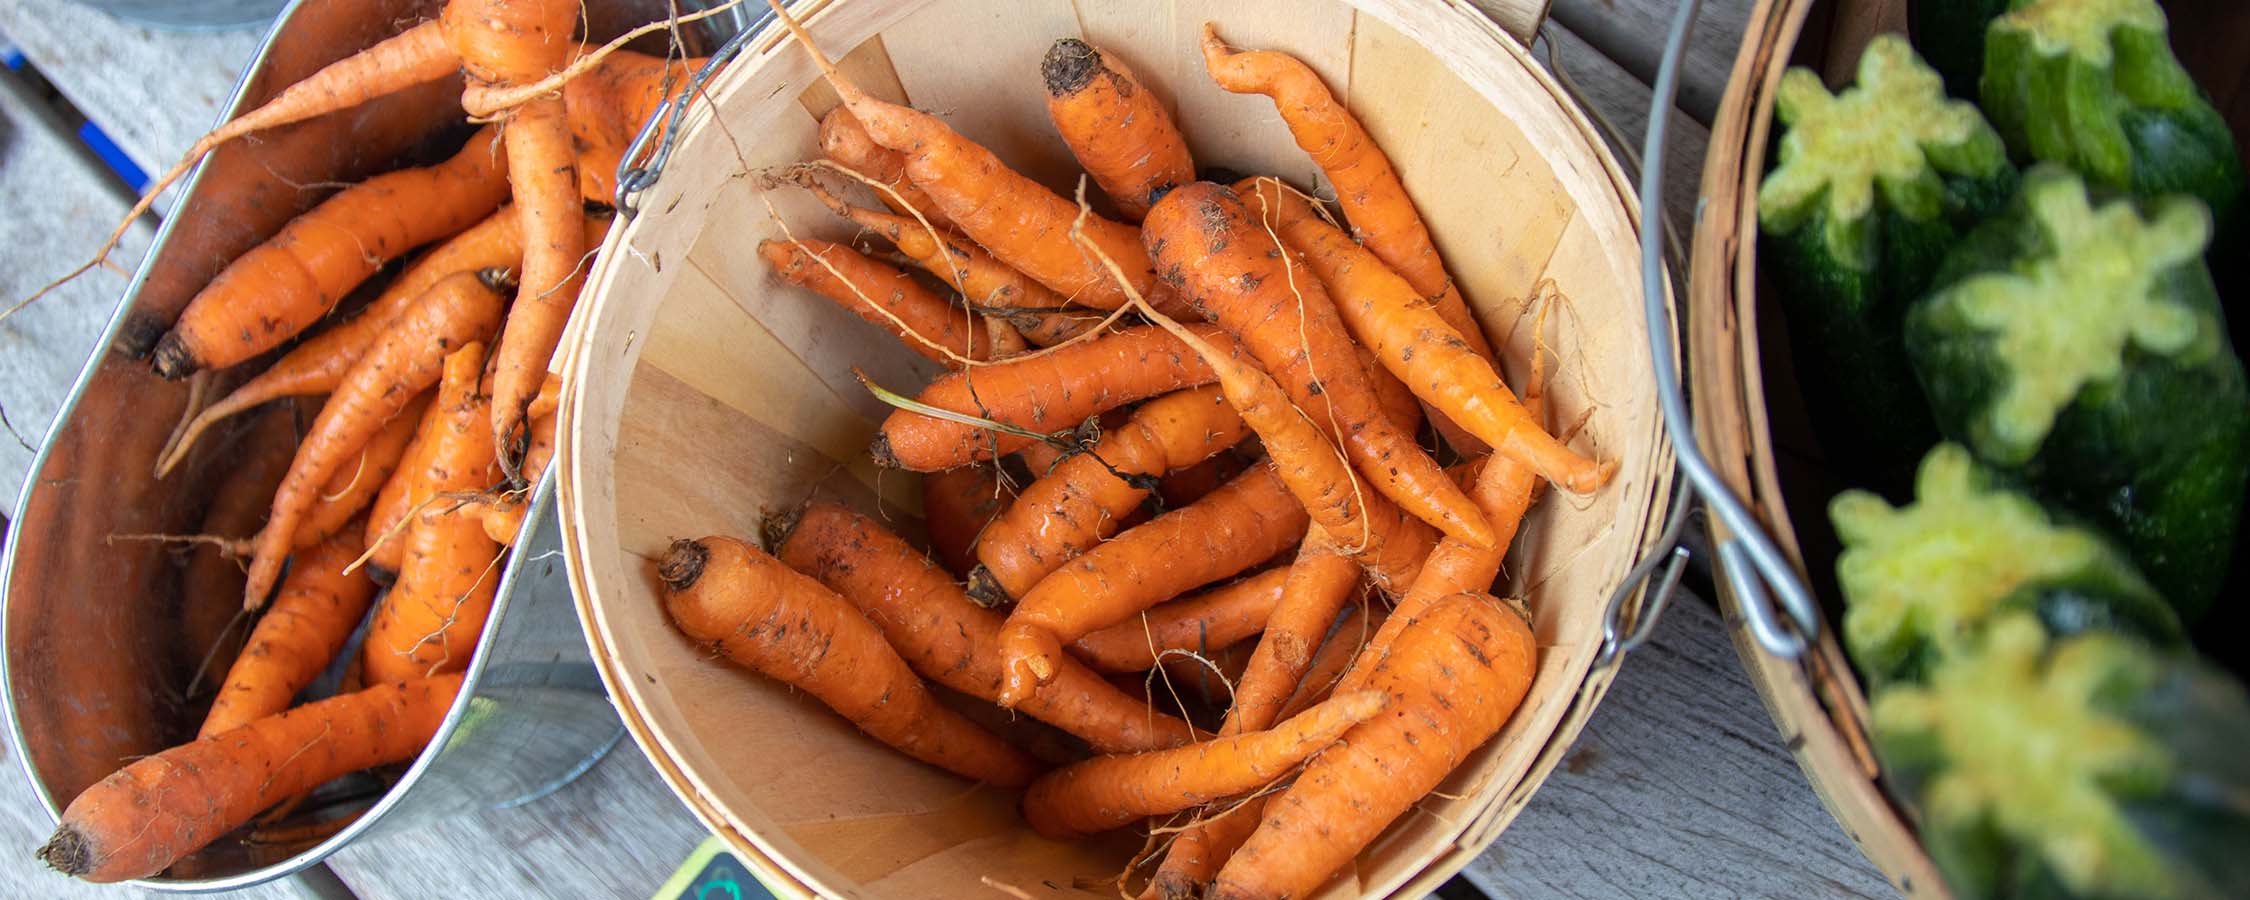 Sustainability - Carrot in buckets